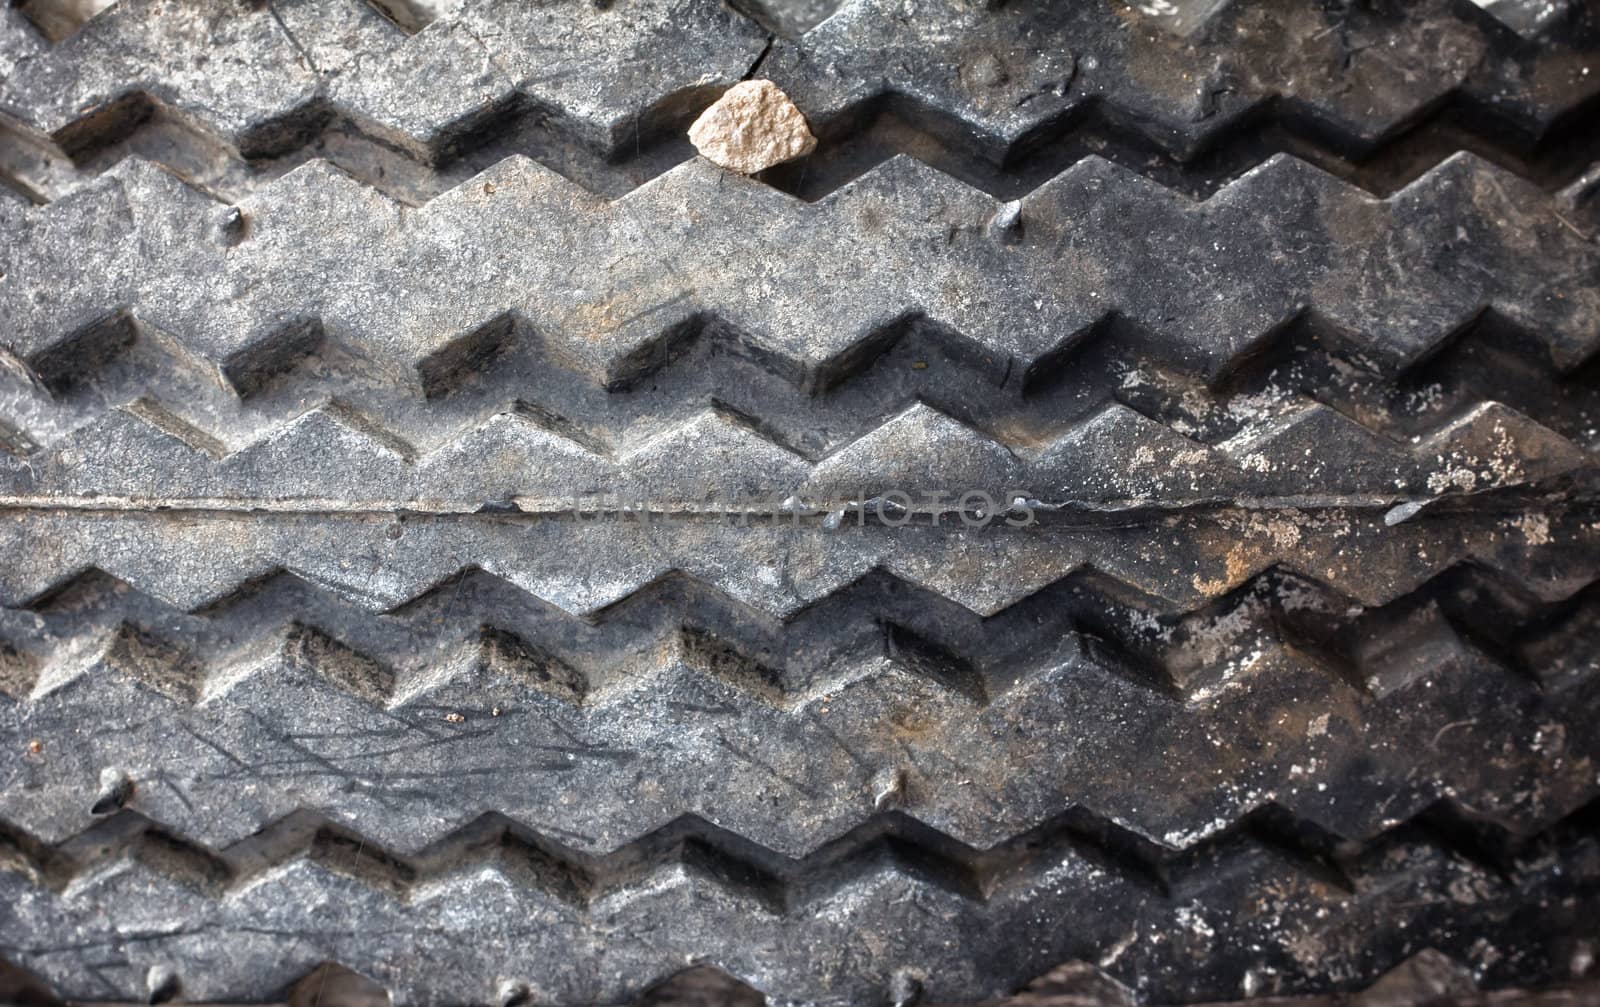 Worn Bias Ply Tire by wolterk